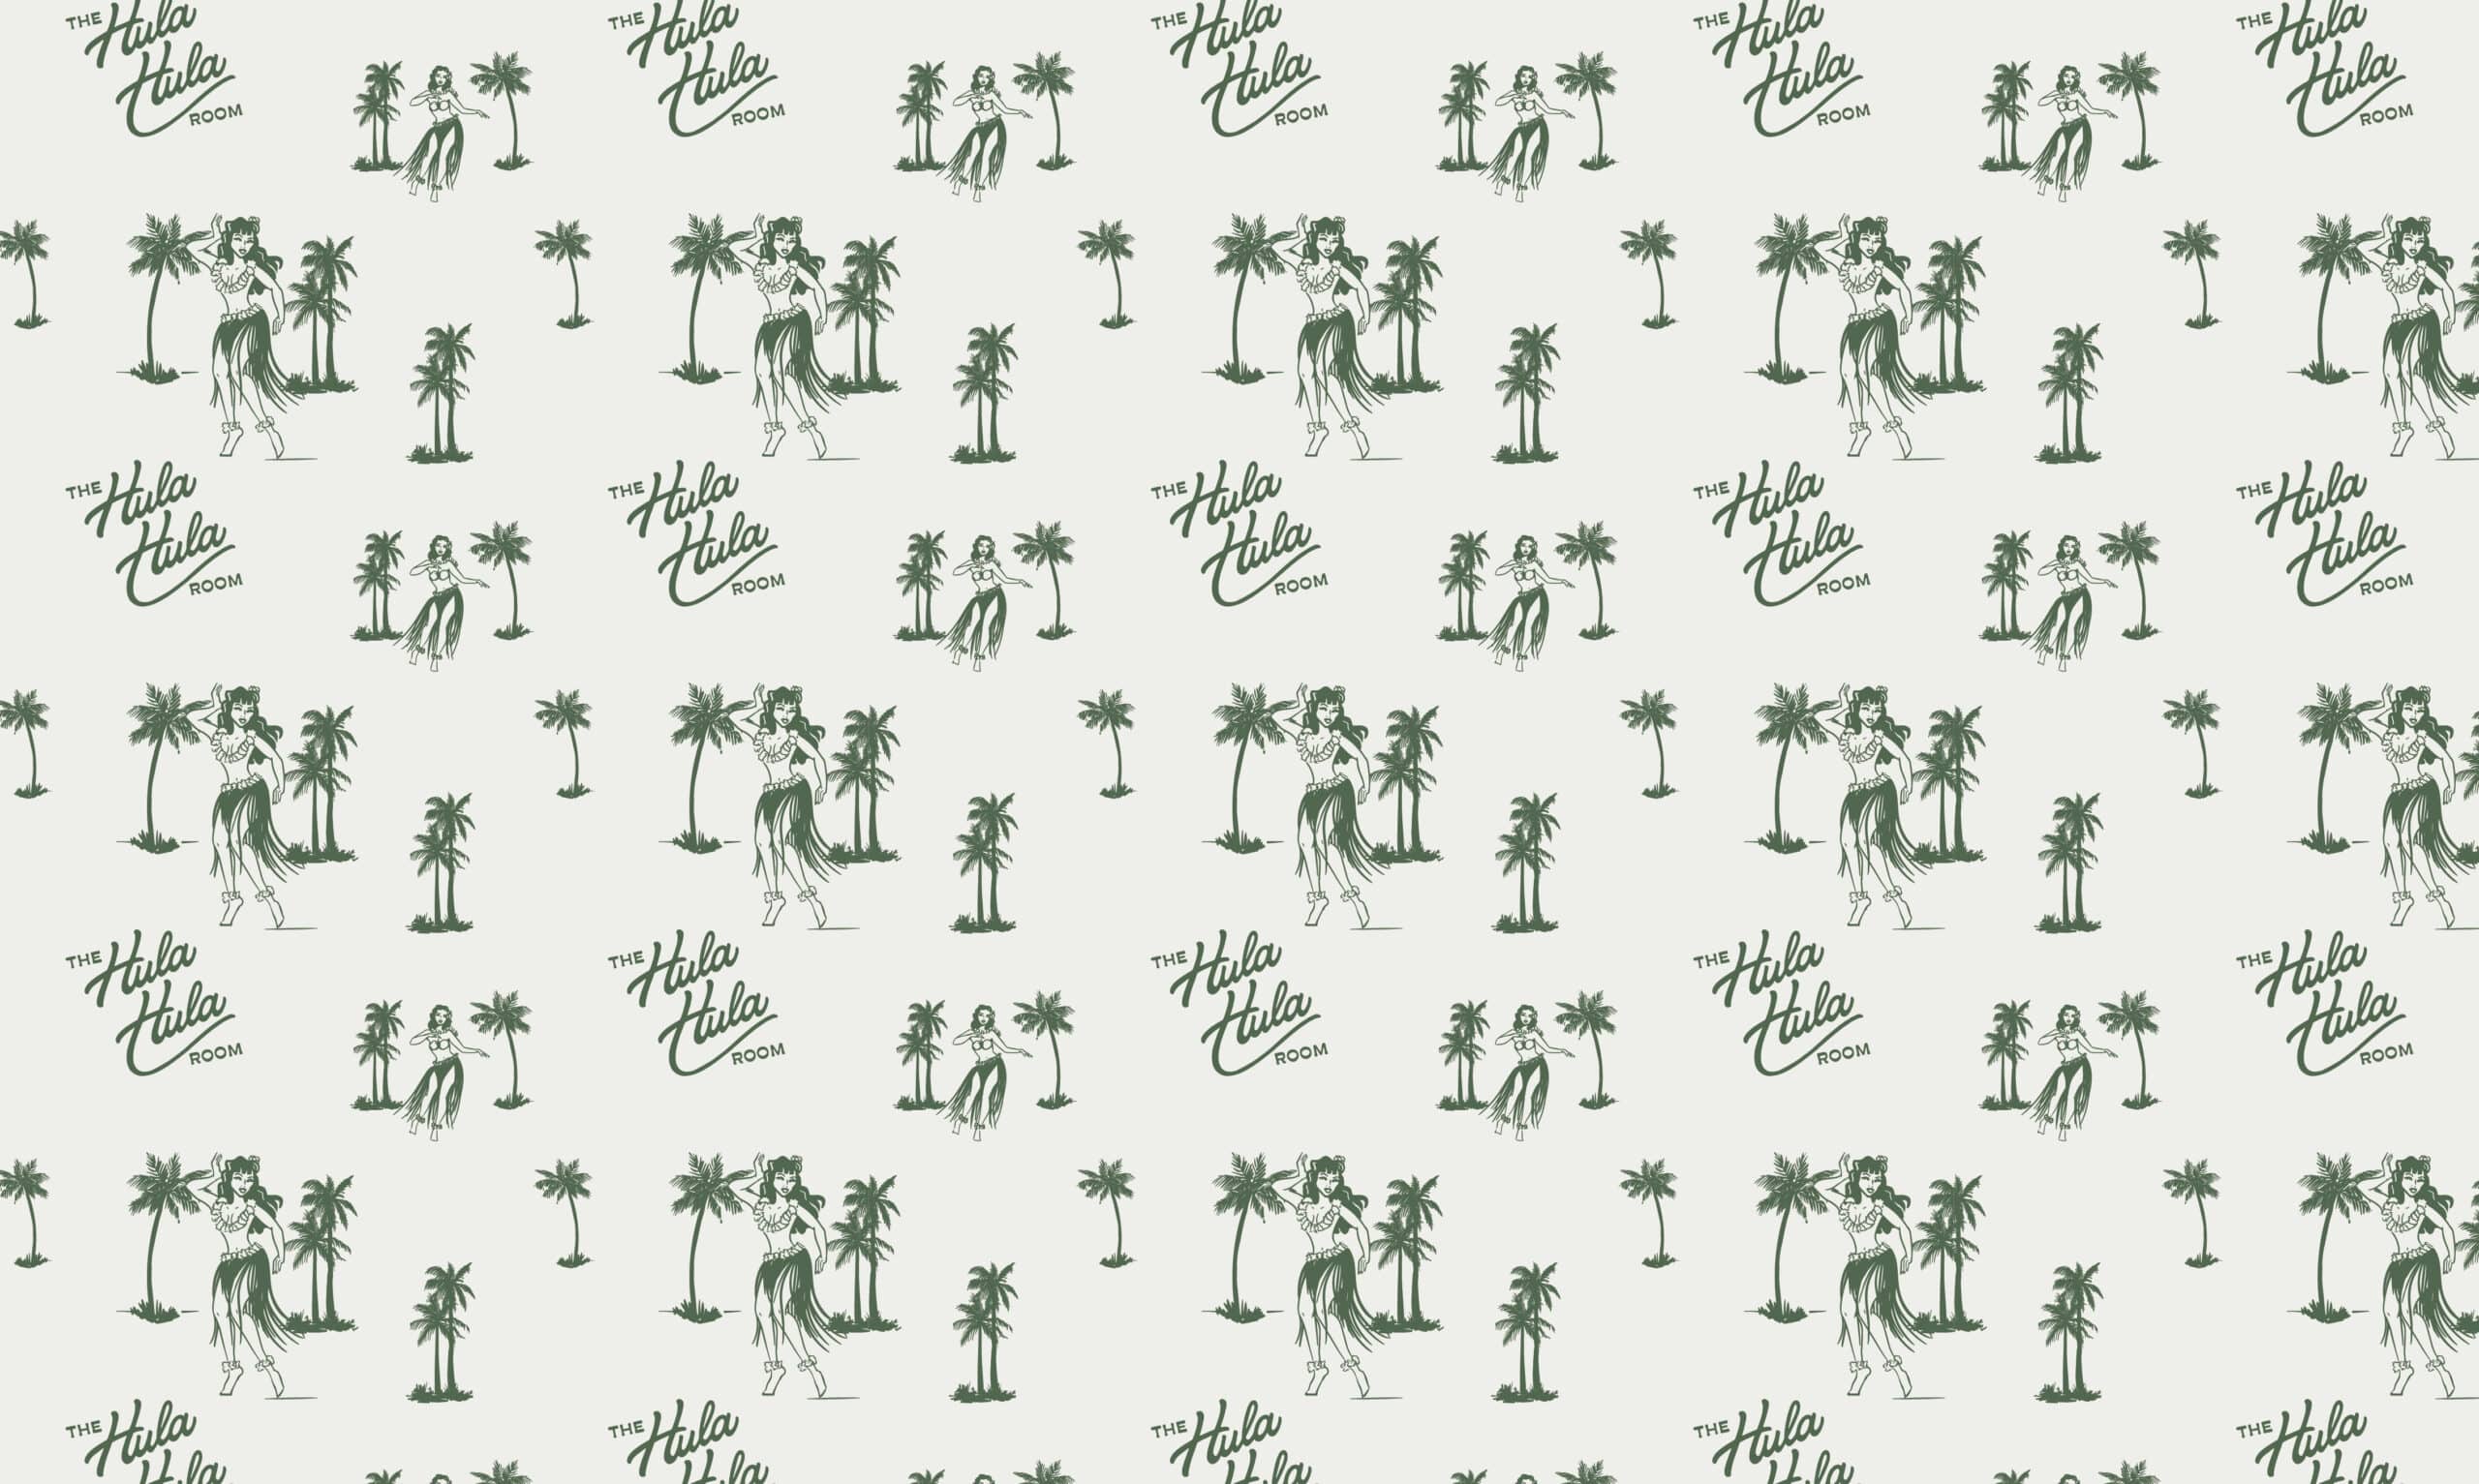 Tropical pattern for The Hula Hula Room Tiki Bar in Torrance California designed by Stellen Design logo design and branding agency in Los Angeles California specializing in logo design for hospitality brands